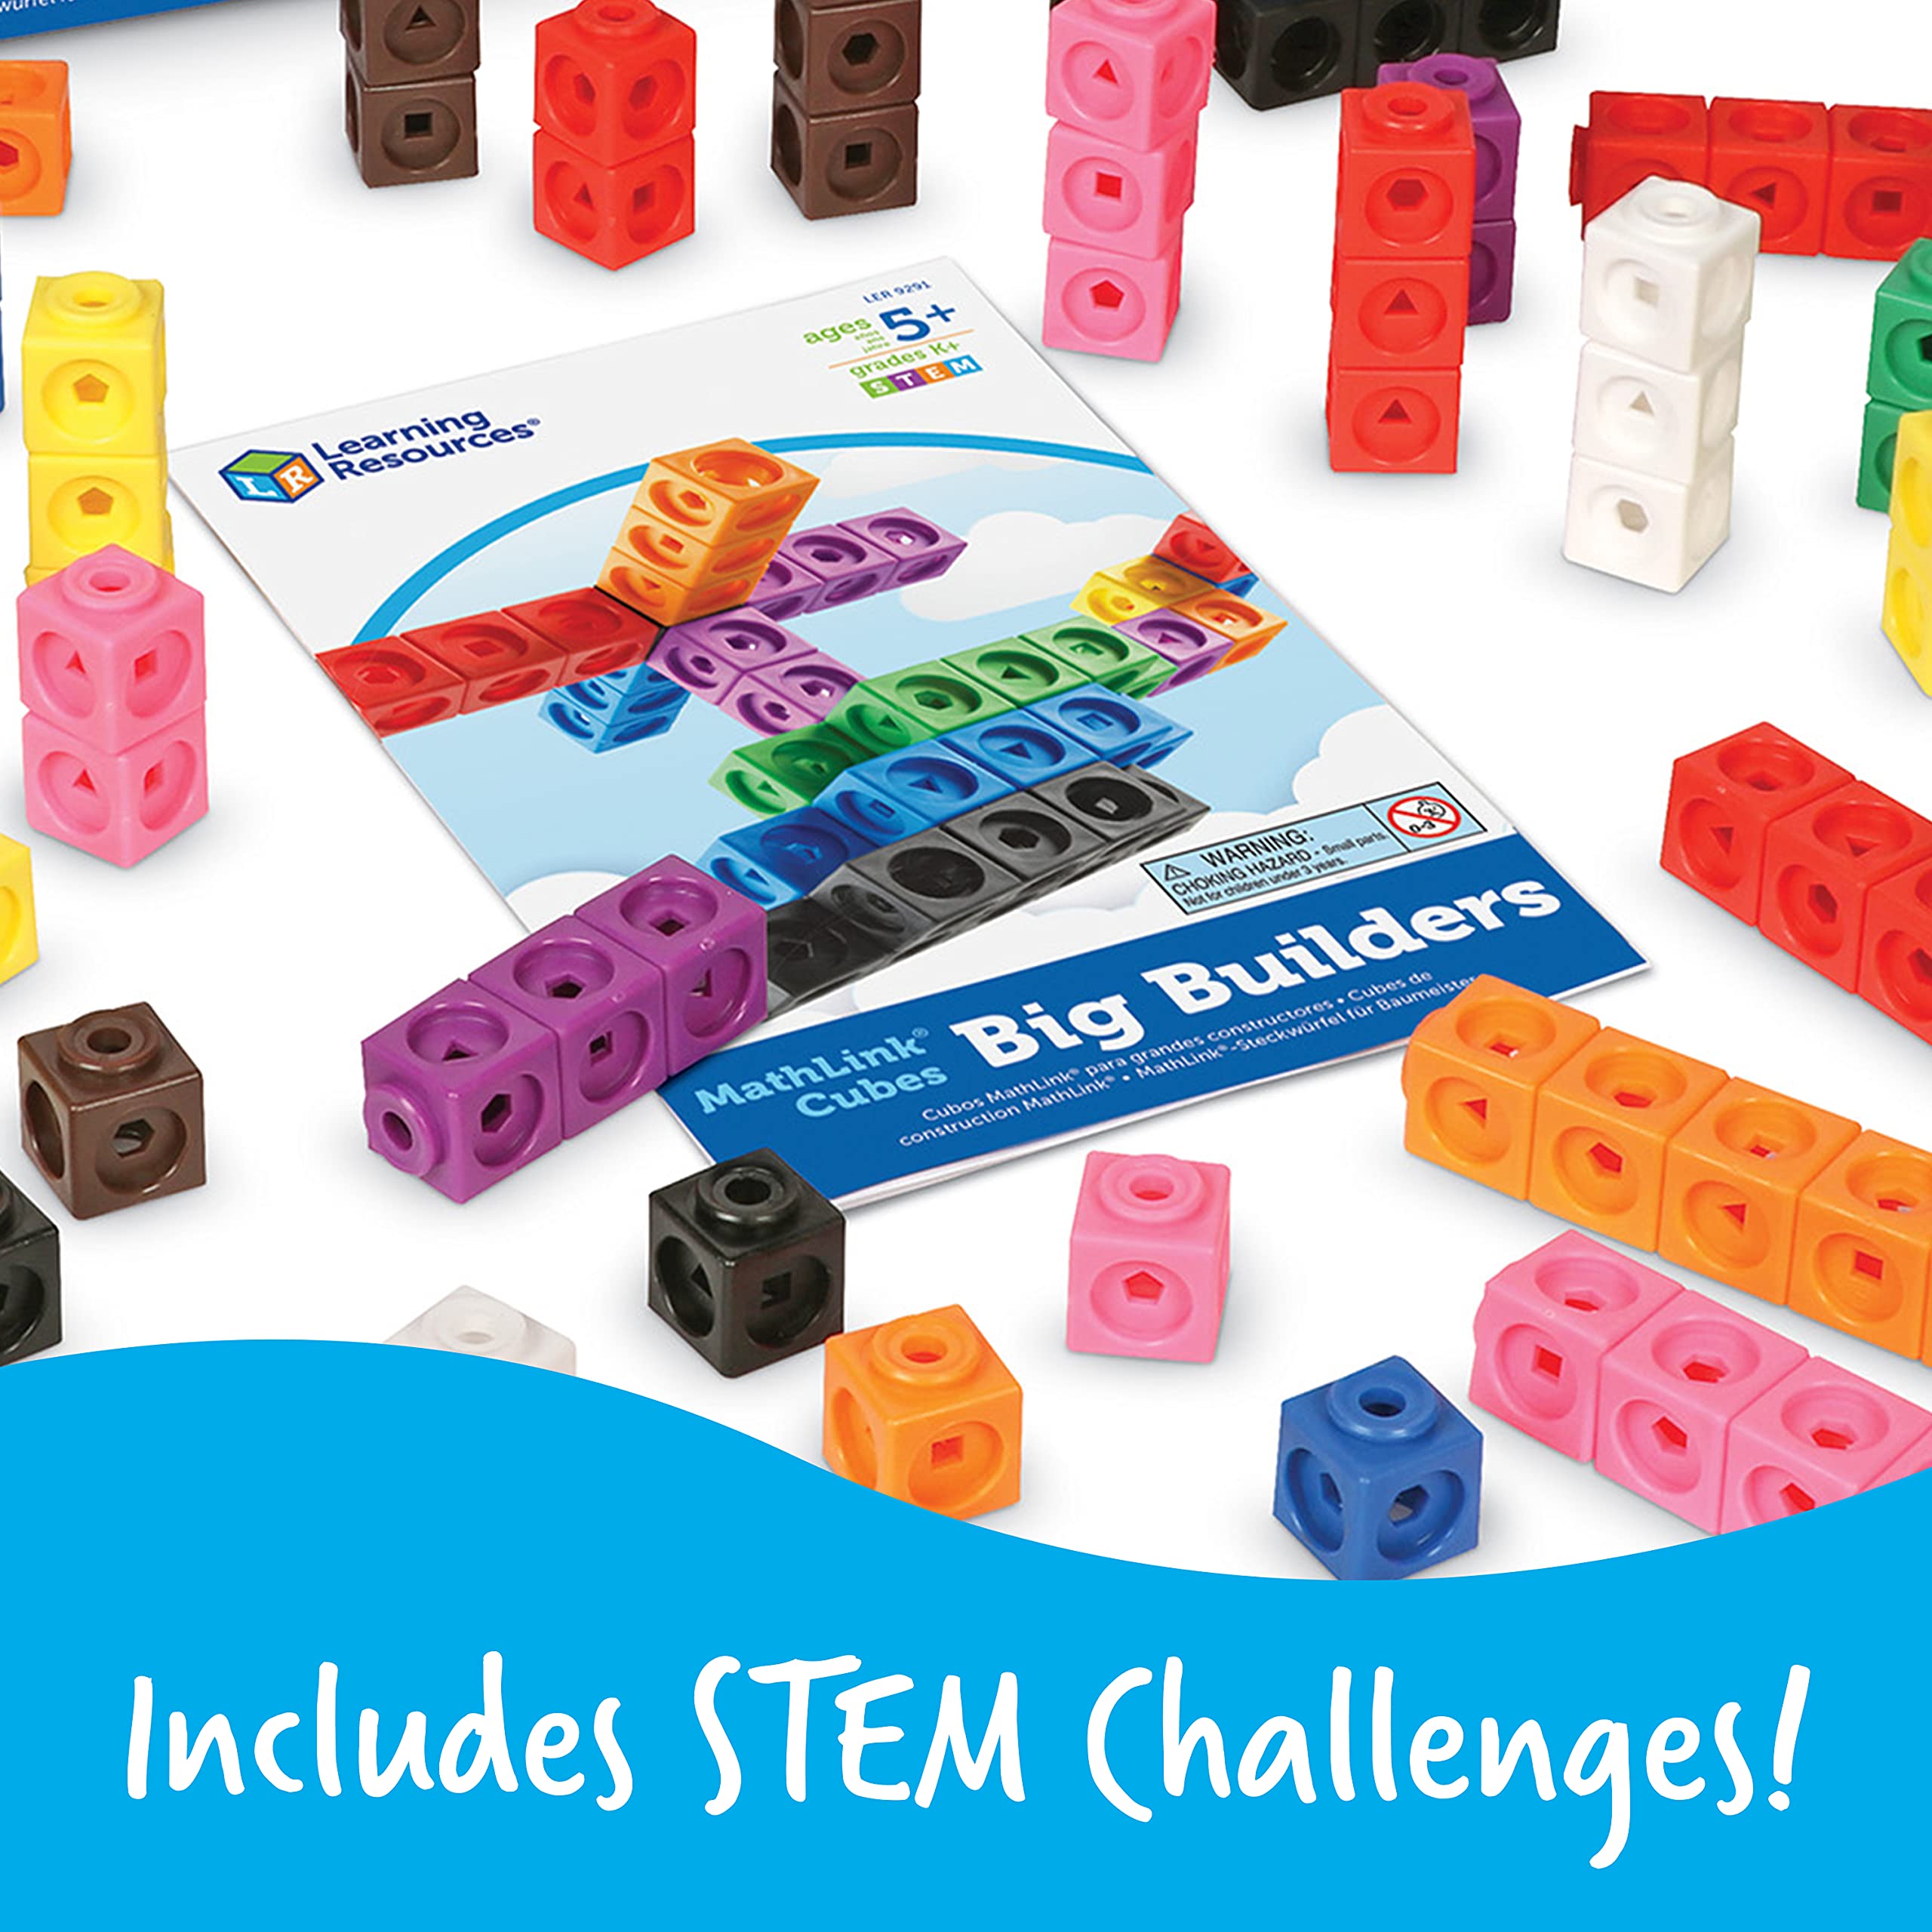 Learning Resources MathLink Cubes Big Builders - Set of 200 Cubes, Ages 5+, Develops Early Math Skills, STEM Toys, Math Games for Kids, Math Cubes for Kids,Back to School Gifts